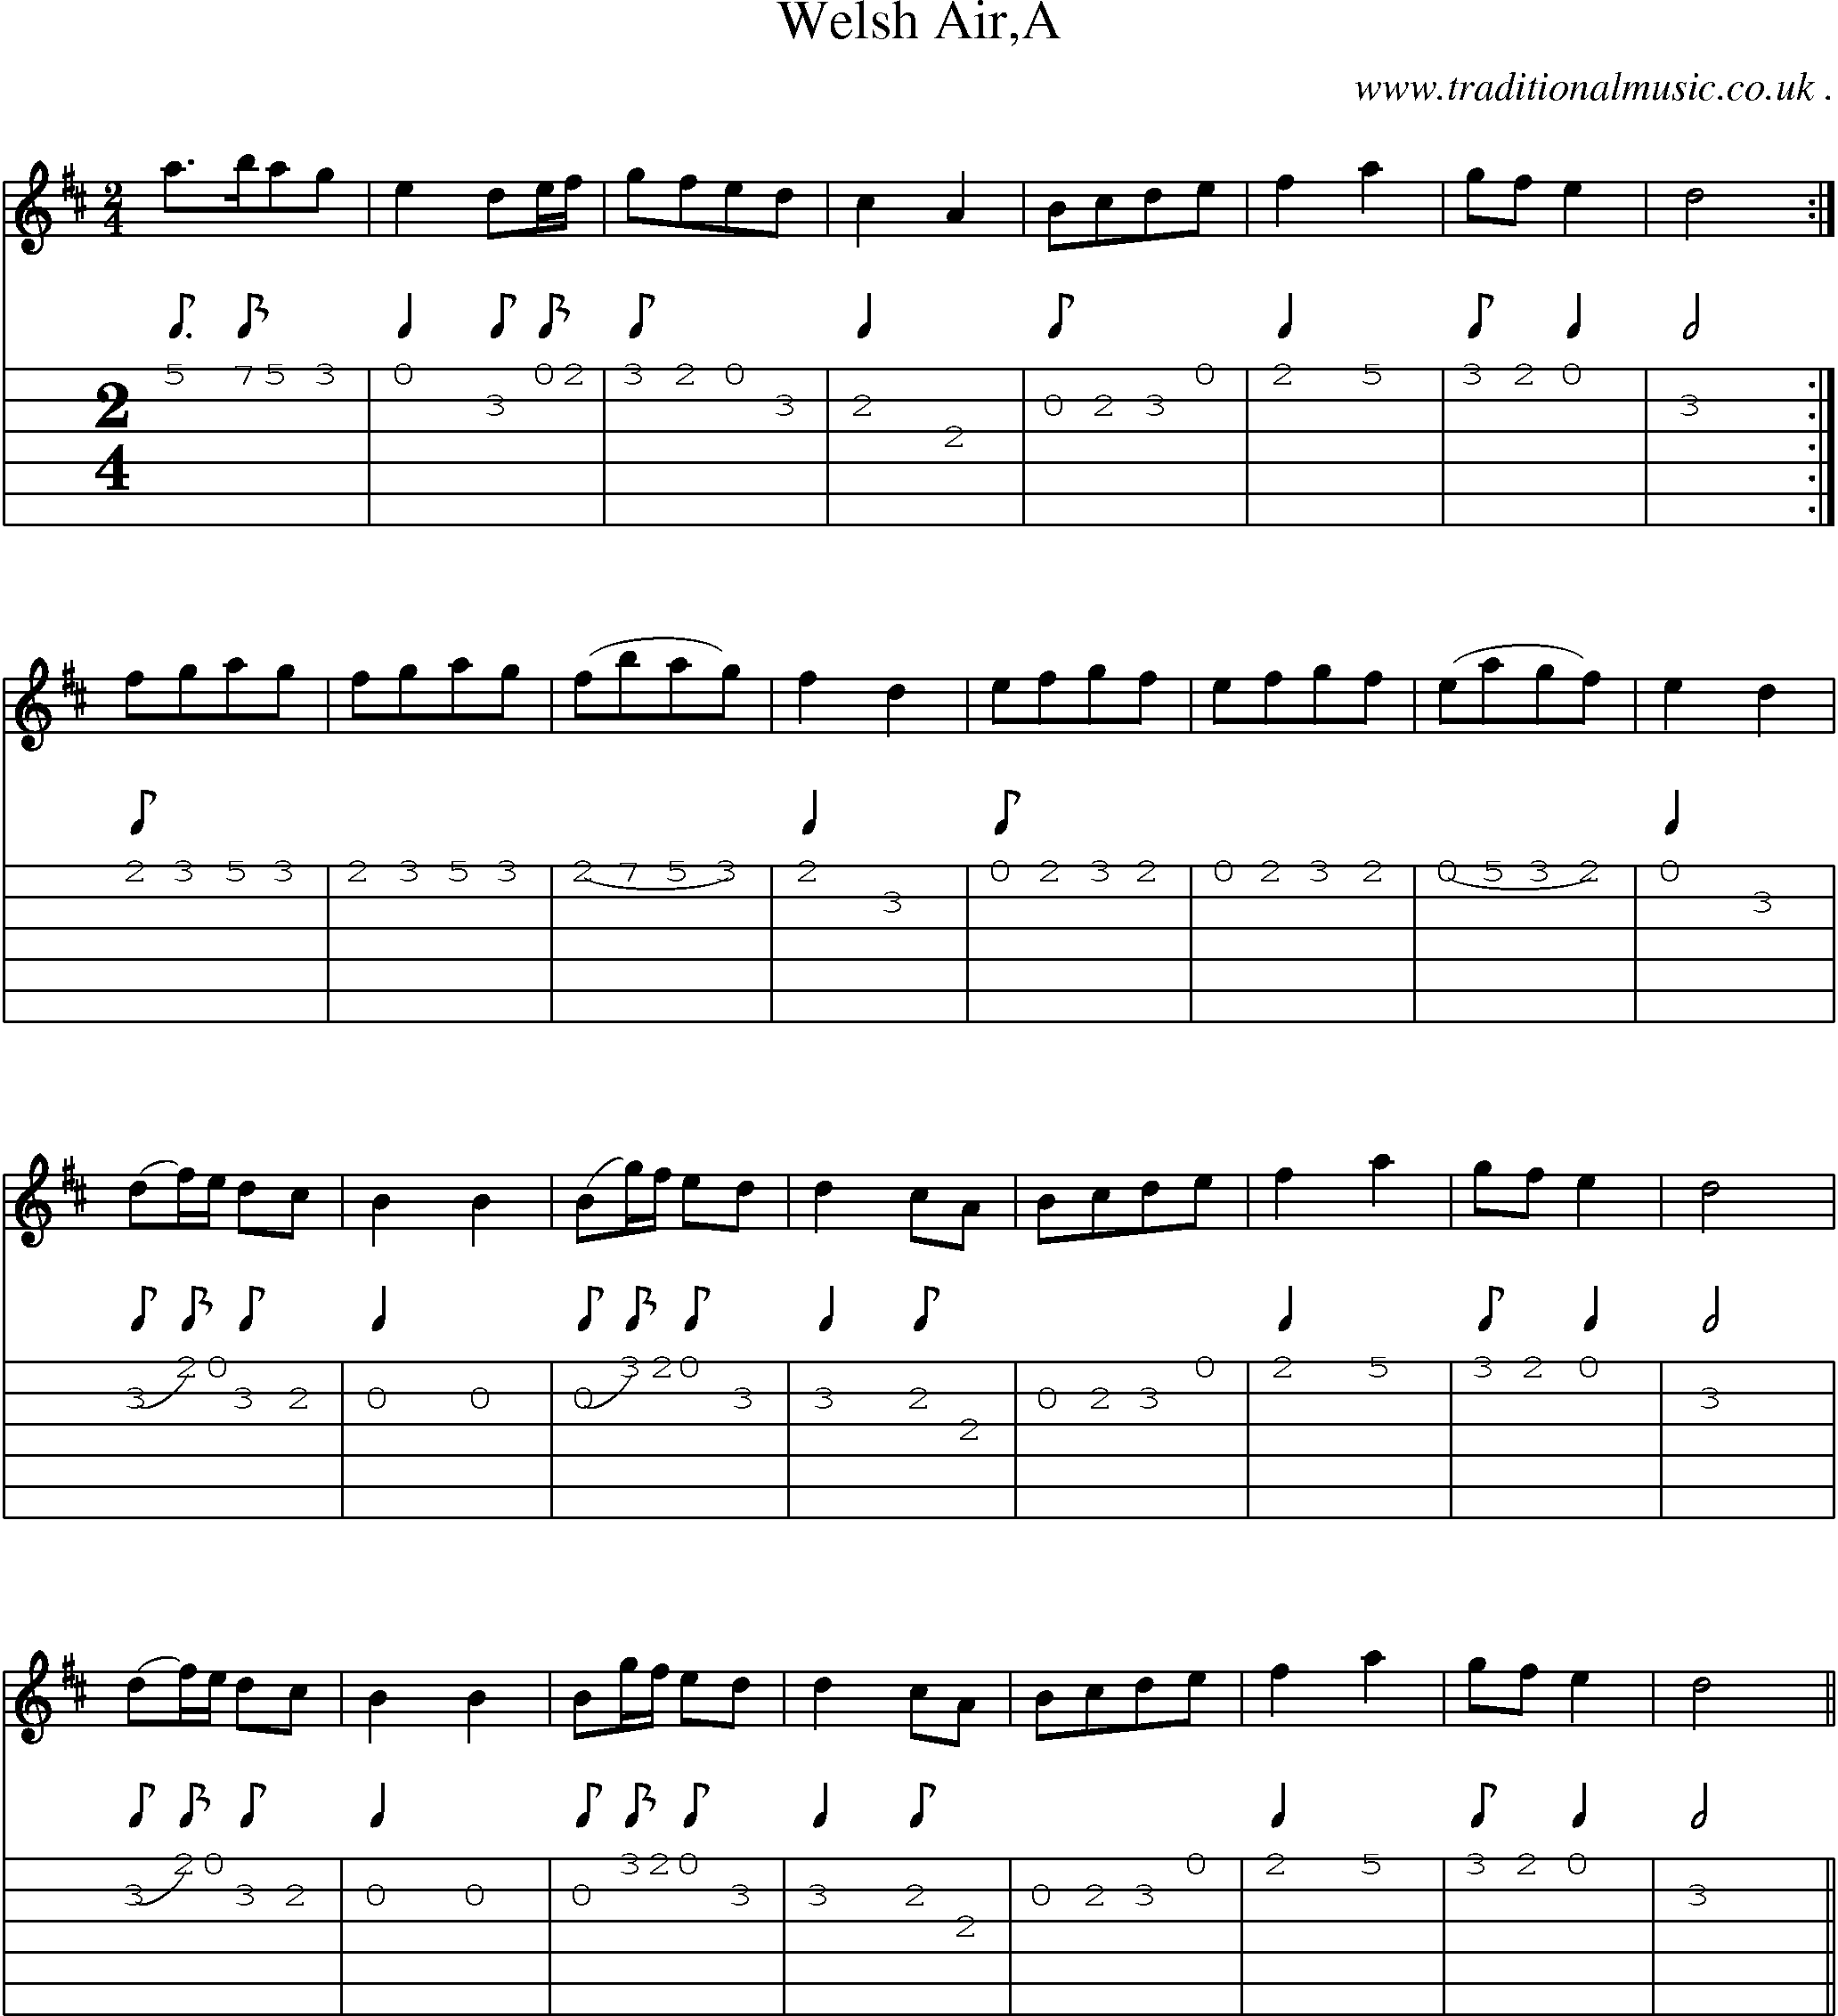 Sheet-Music and Guitar Tabs for Welsh Aira